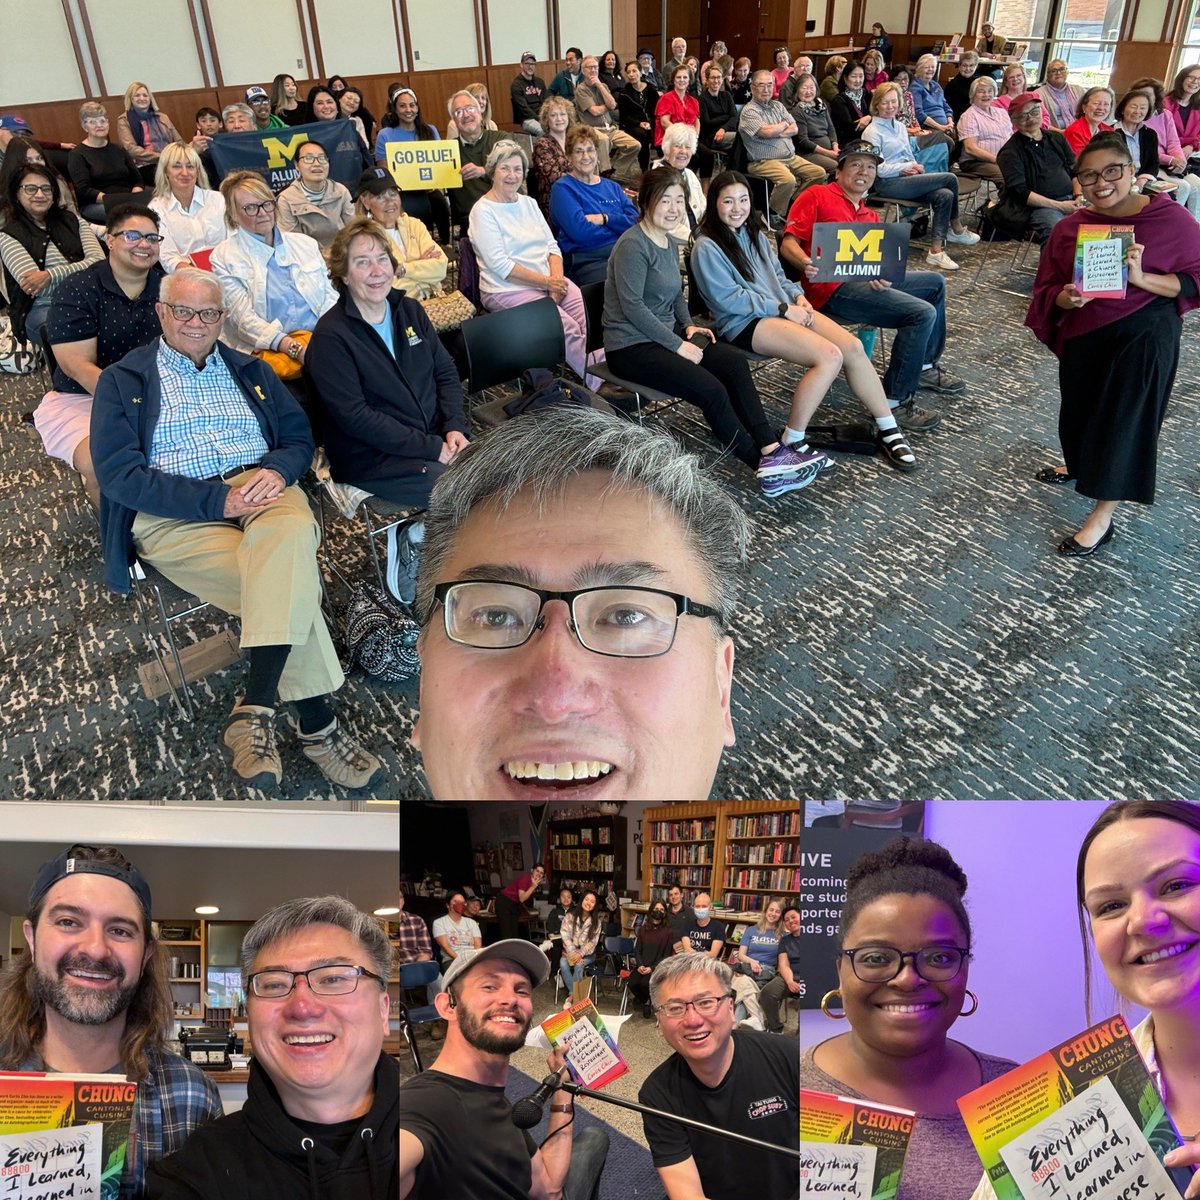 Thnx #indianapolis for a great Easter weekend. Props to @carmel_library @tomorrowbookstore @umaaapialumni for hosting great events! @melissamayborja @jakebudler for emceeing! @indyreadsorg for carrying my book! and @bluebeardindy for supporting artists and writers! @littlebrown